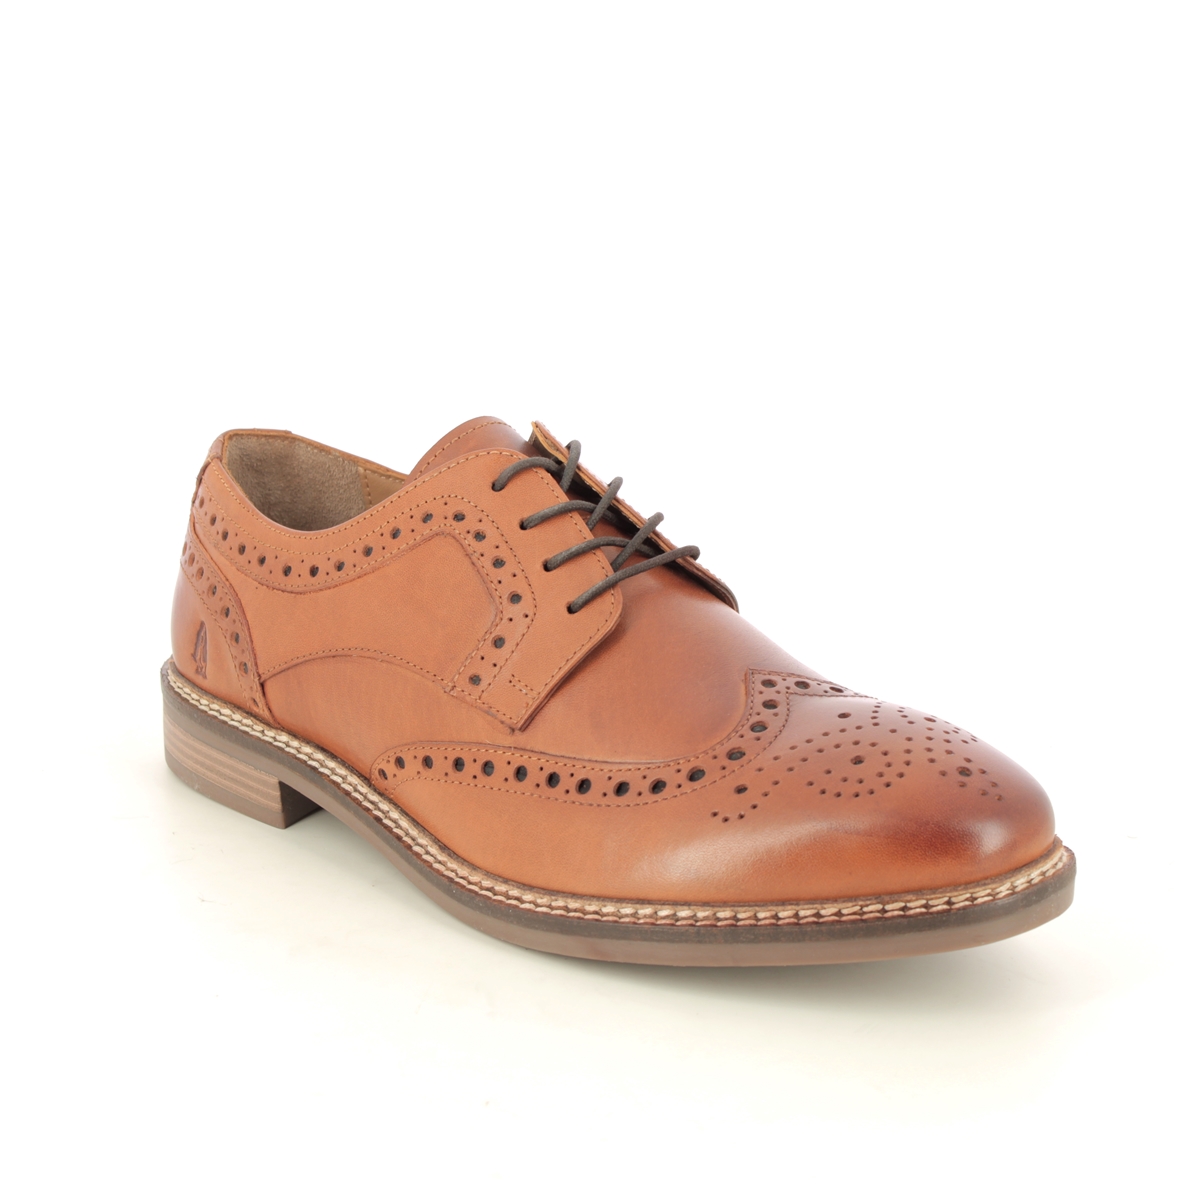 Hush Puppies - Bryson (Tan Leather ) 12355-11 In Size 9 In Plain Tan Leather